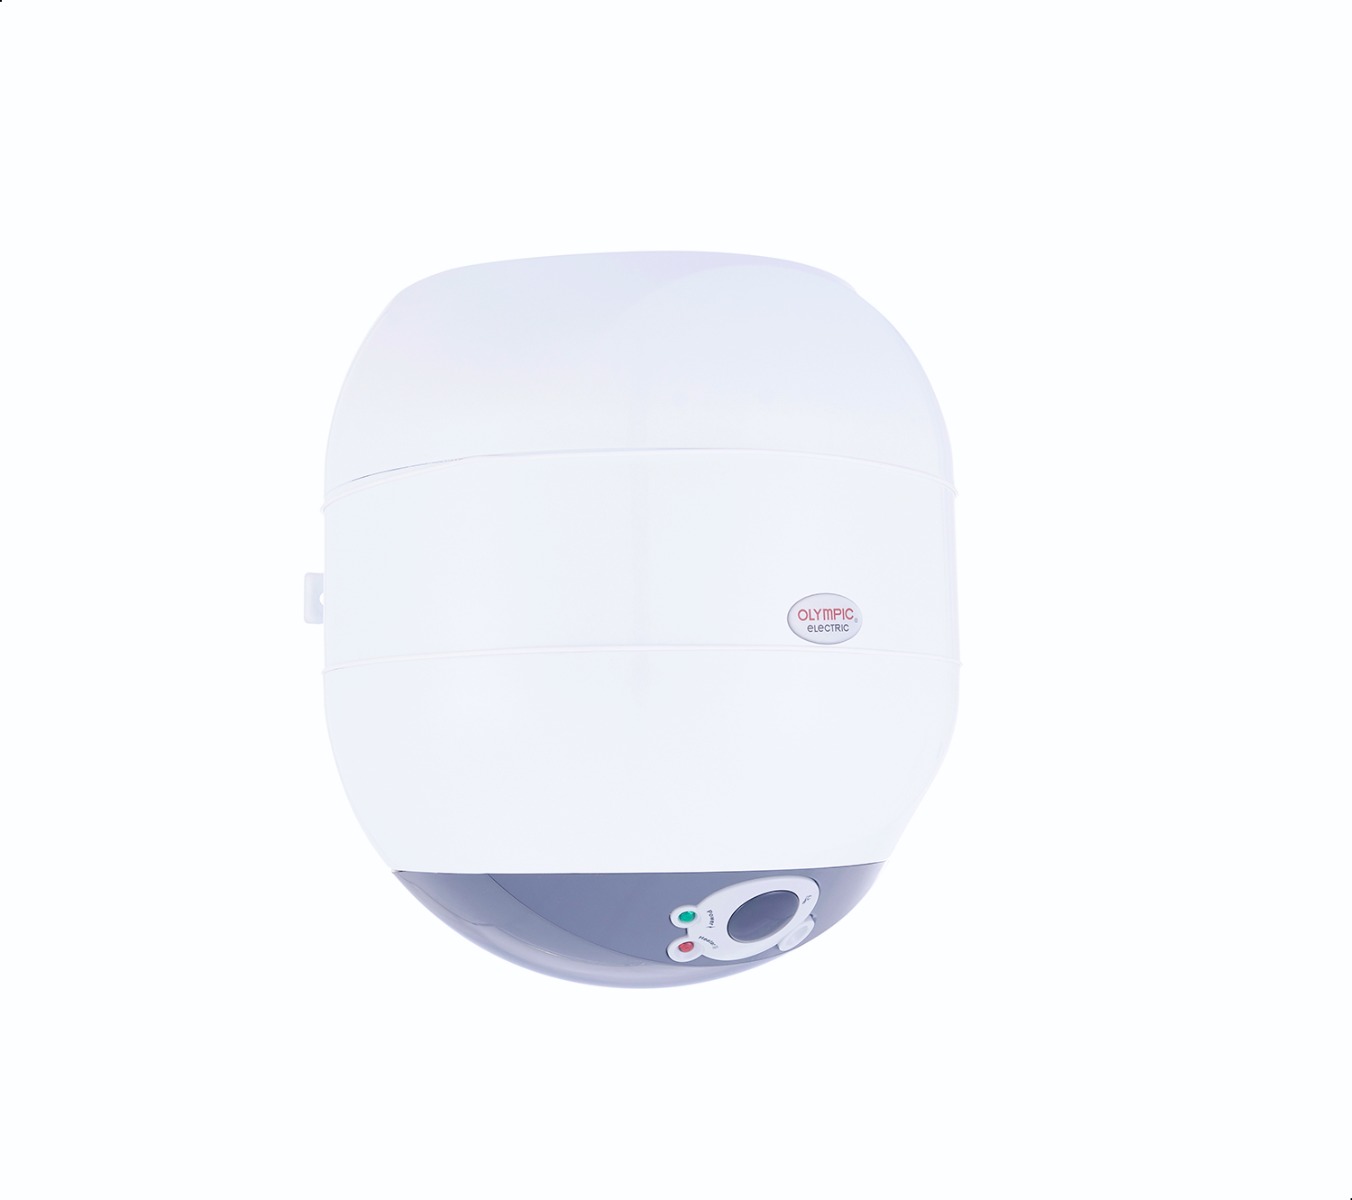 OLympic Digital Electric Water Heater, 30 Liter - White